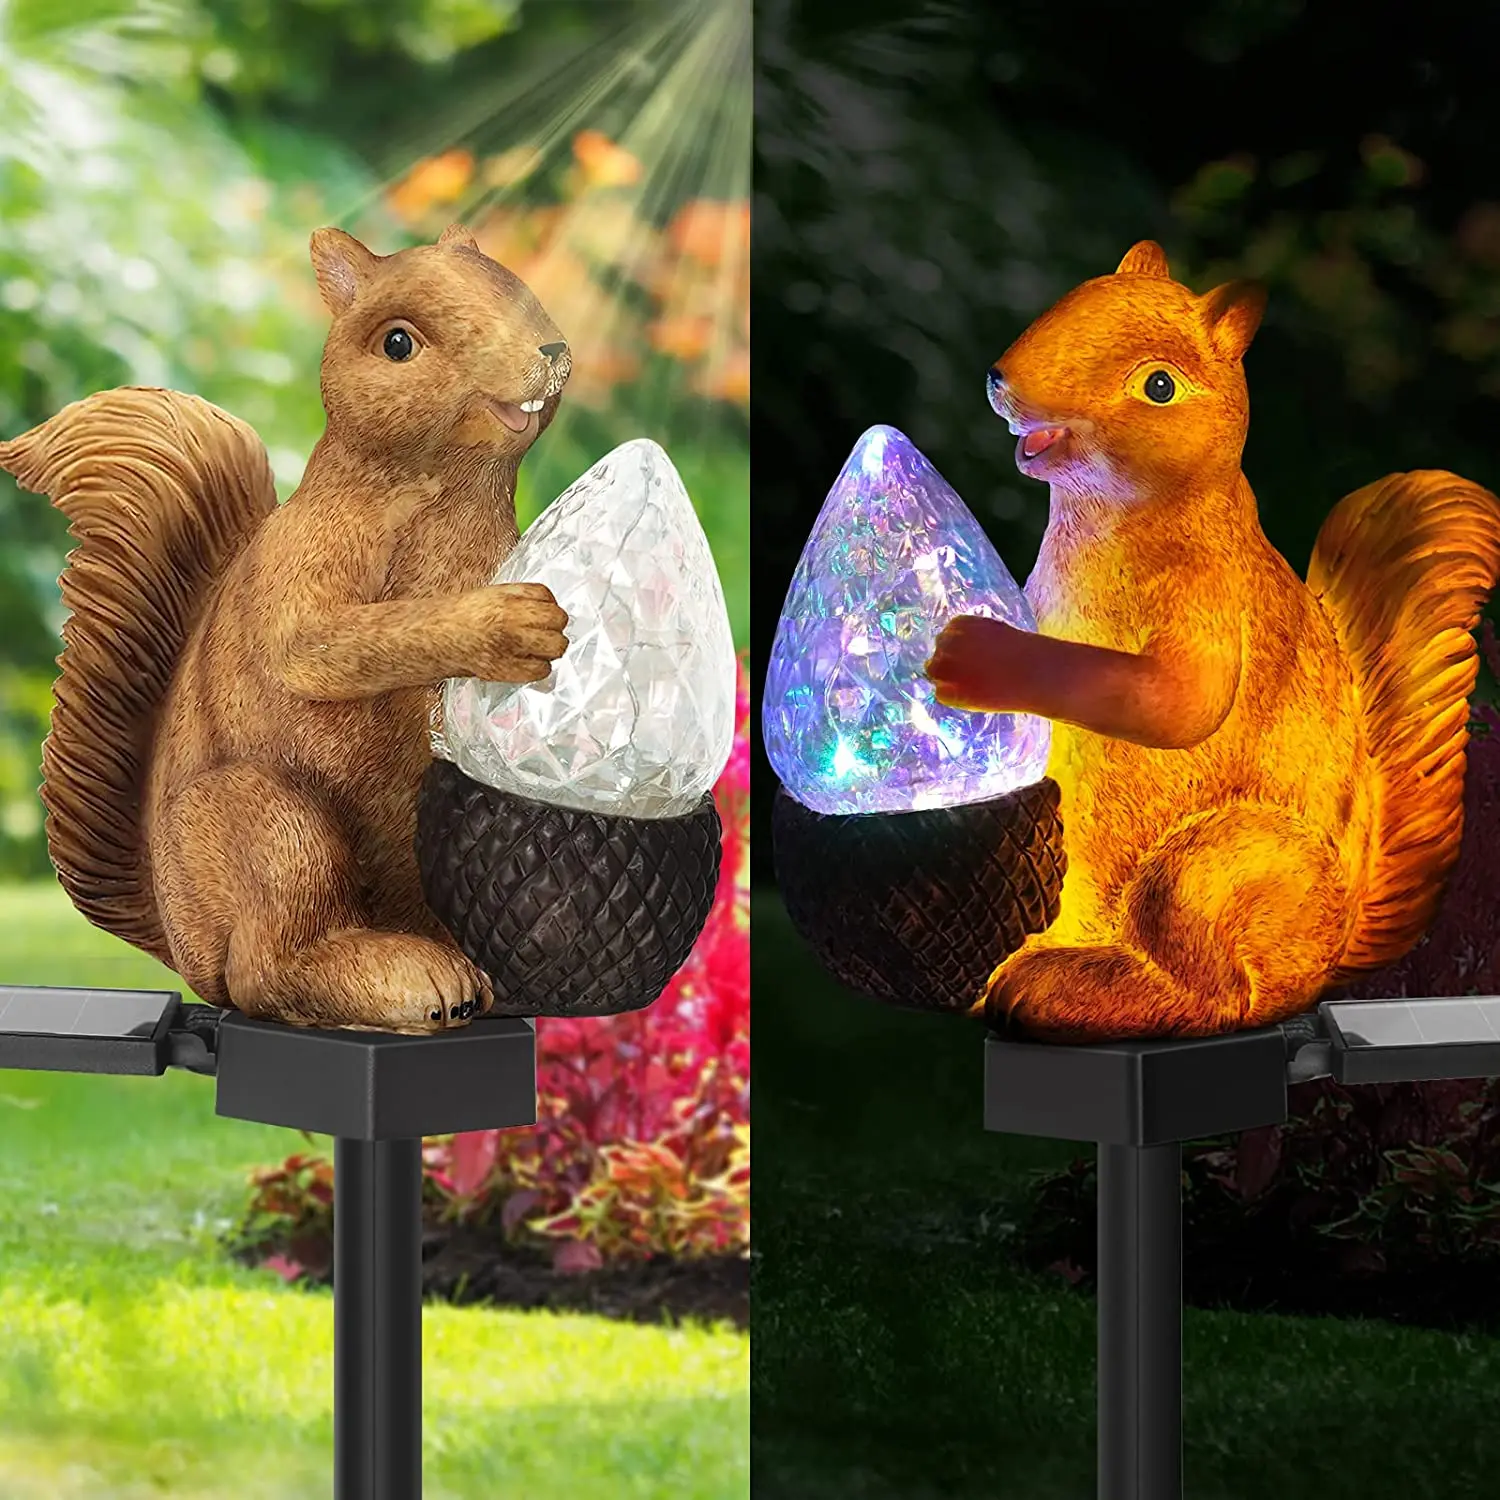 Waterproof Solar Powered LED Light Outdoor Decorative Figurine Lamp Cute Squirre - $205.40